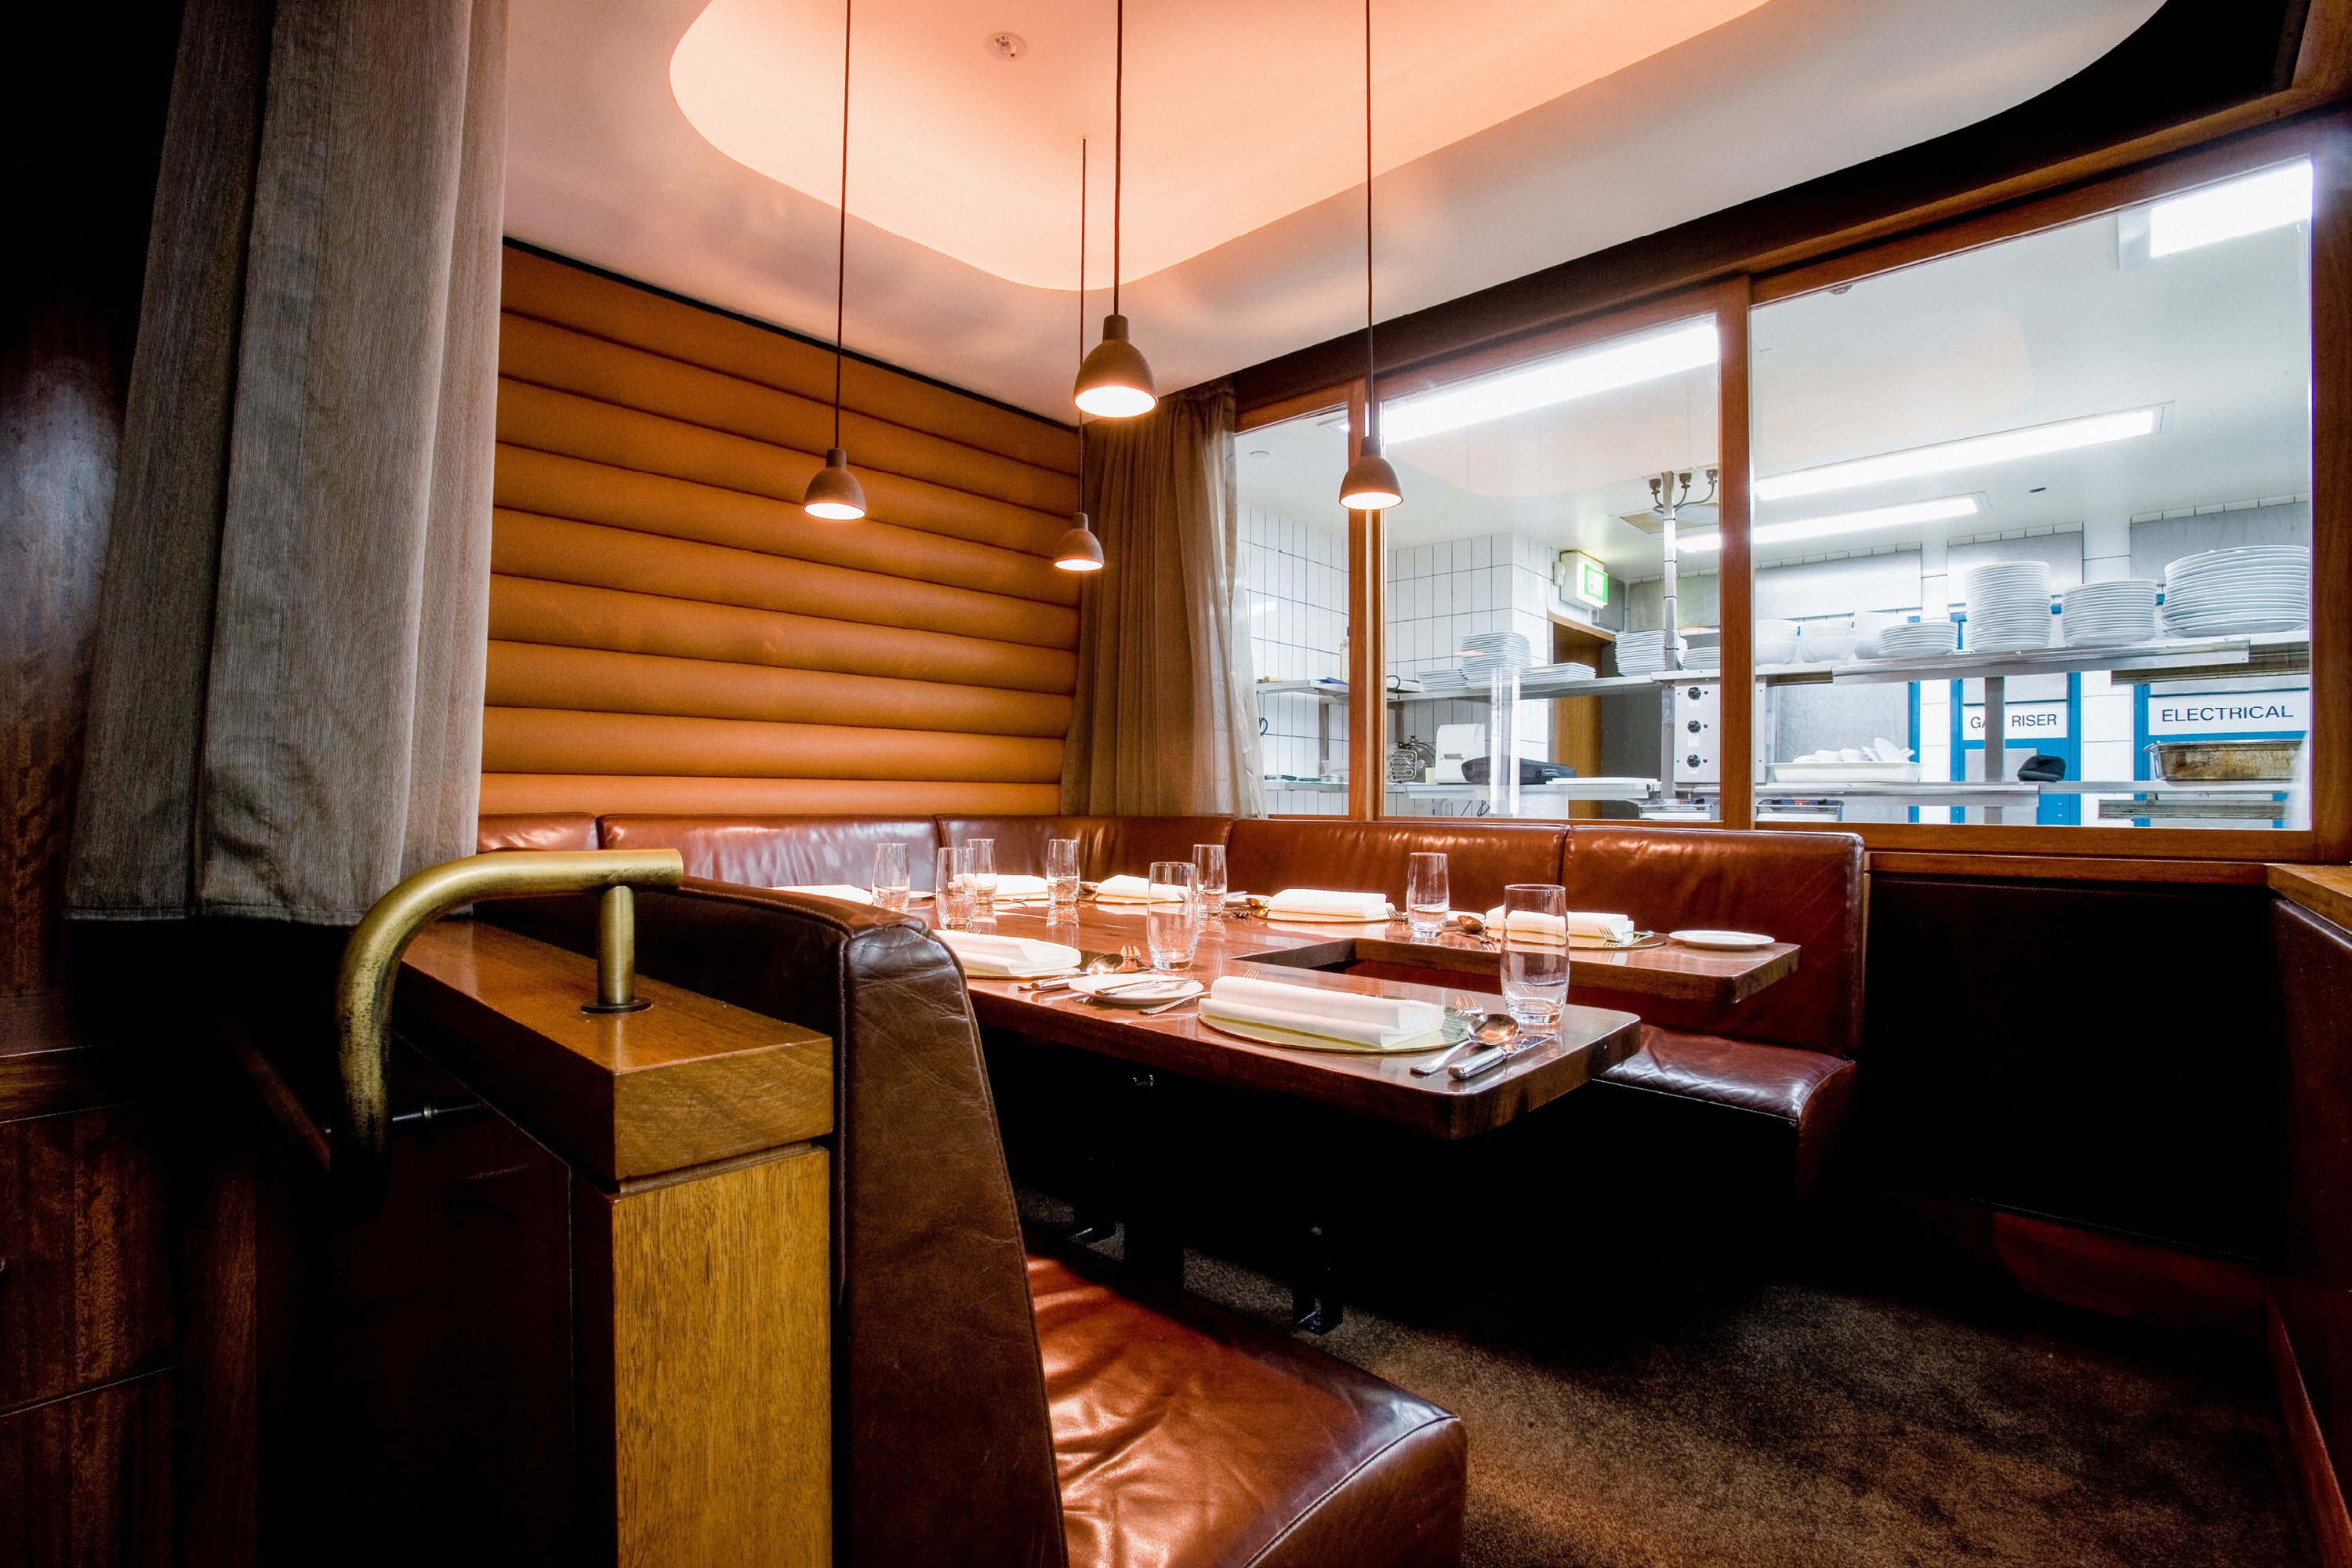 Photograph of the award-wining Aria Restaurant interiors designed by Tzannes